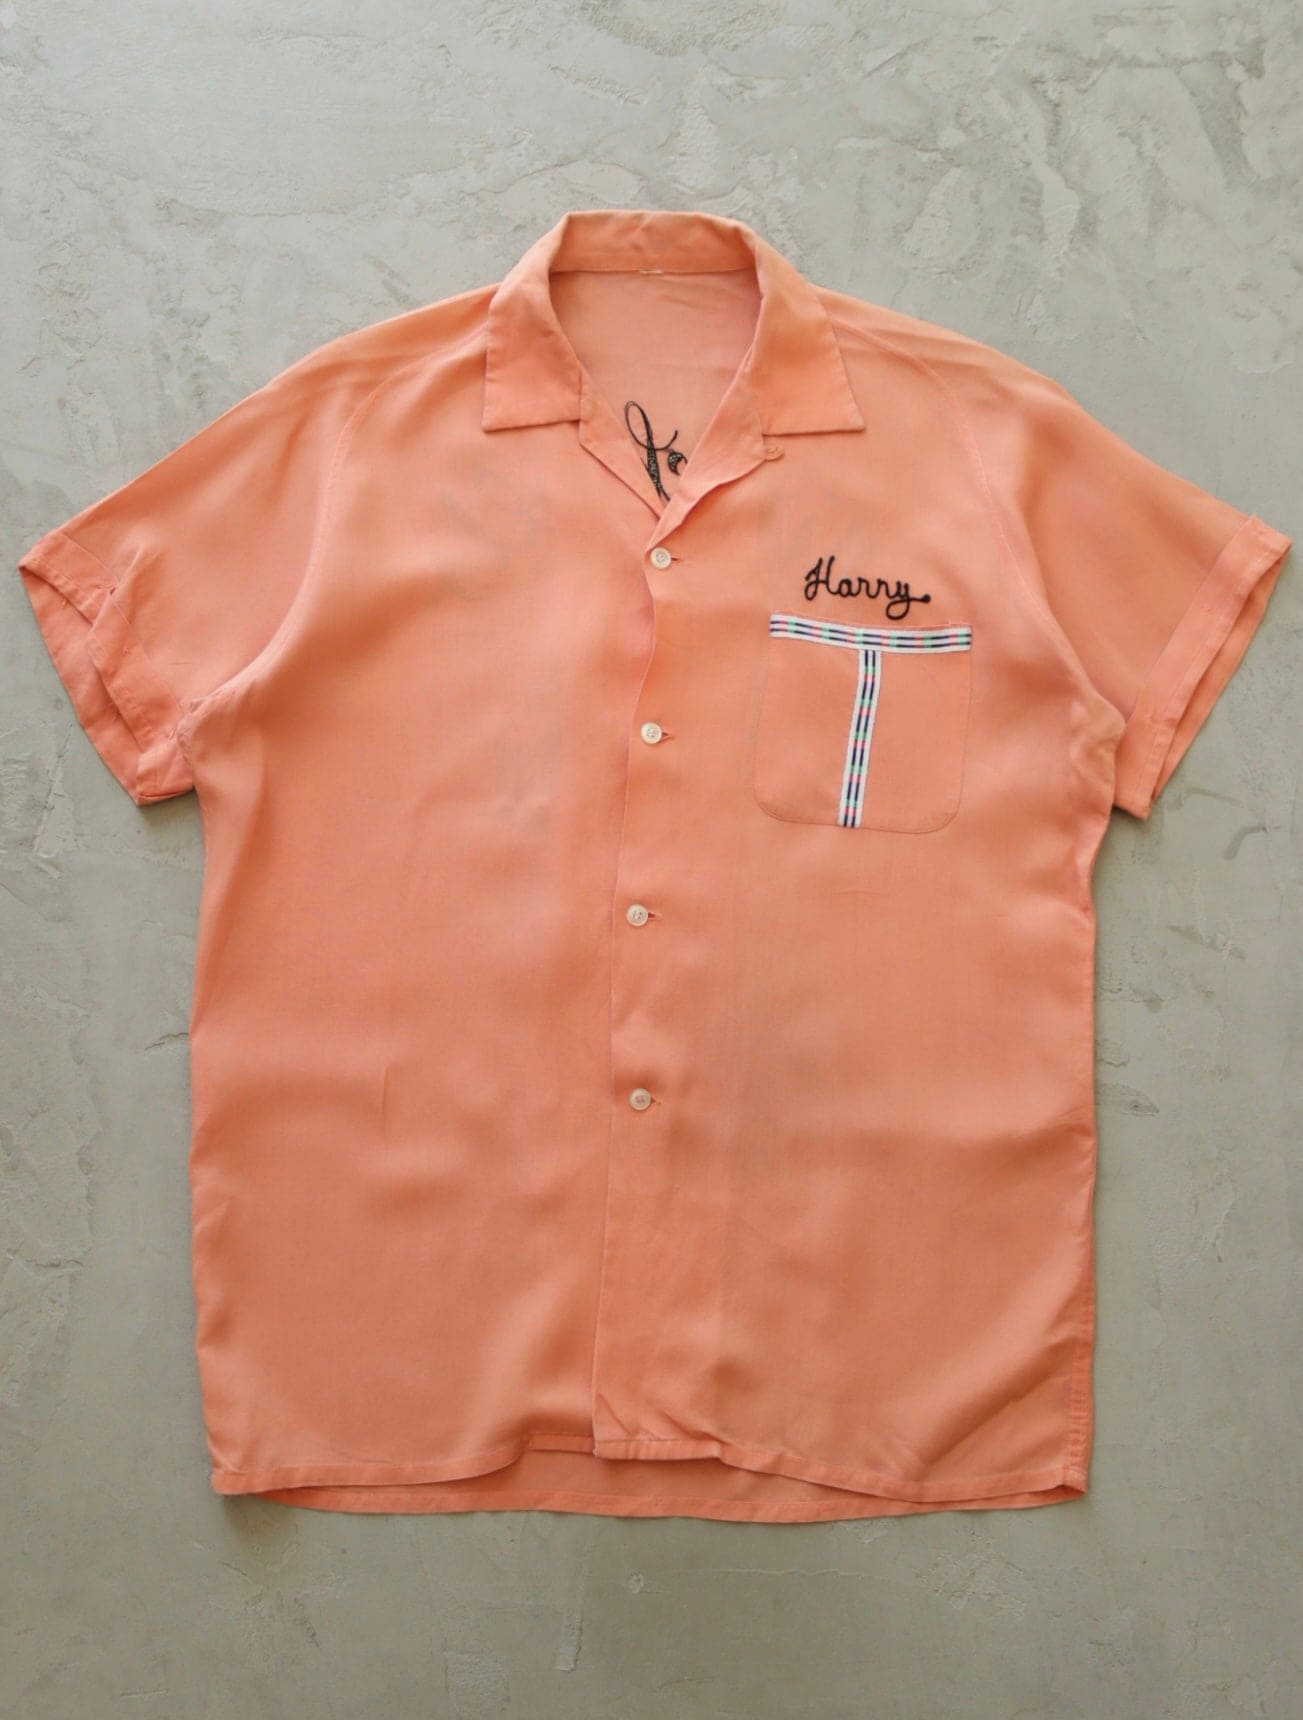 1950S CHAINSTITCH HARRY BOWLING SHIRT - TWO FOLD